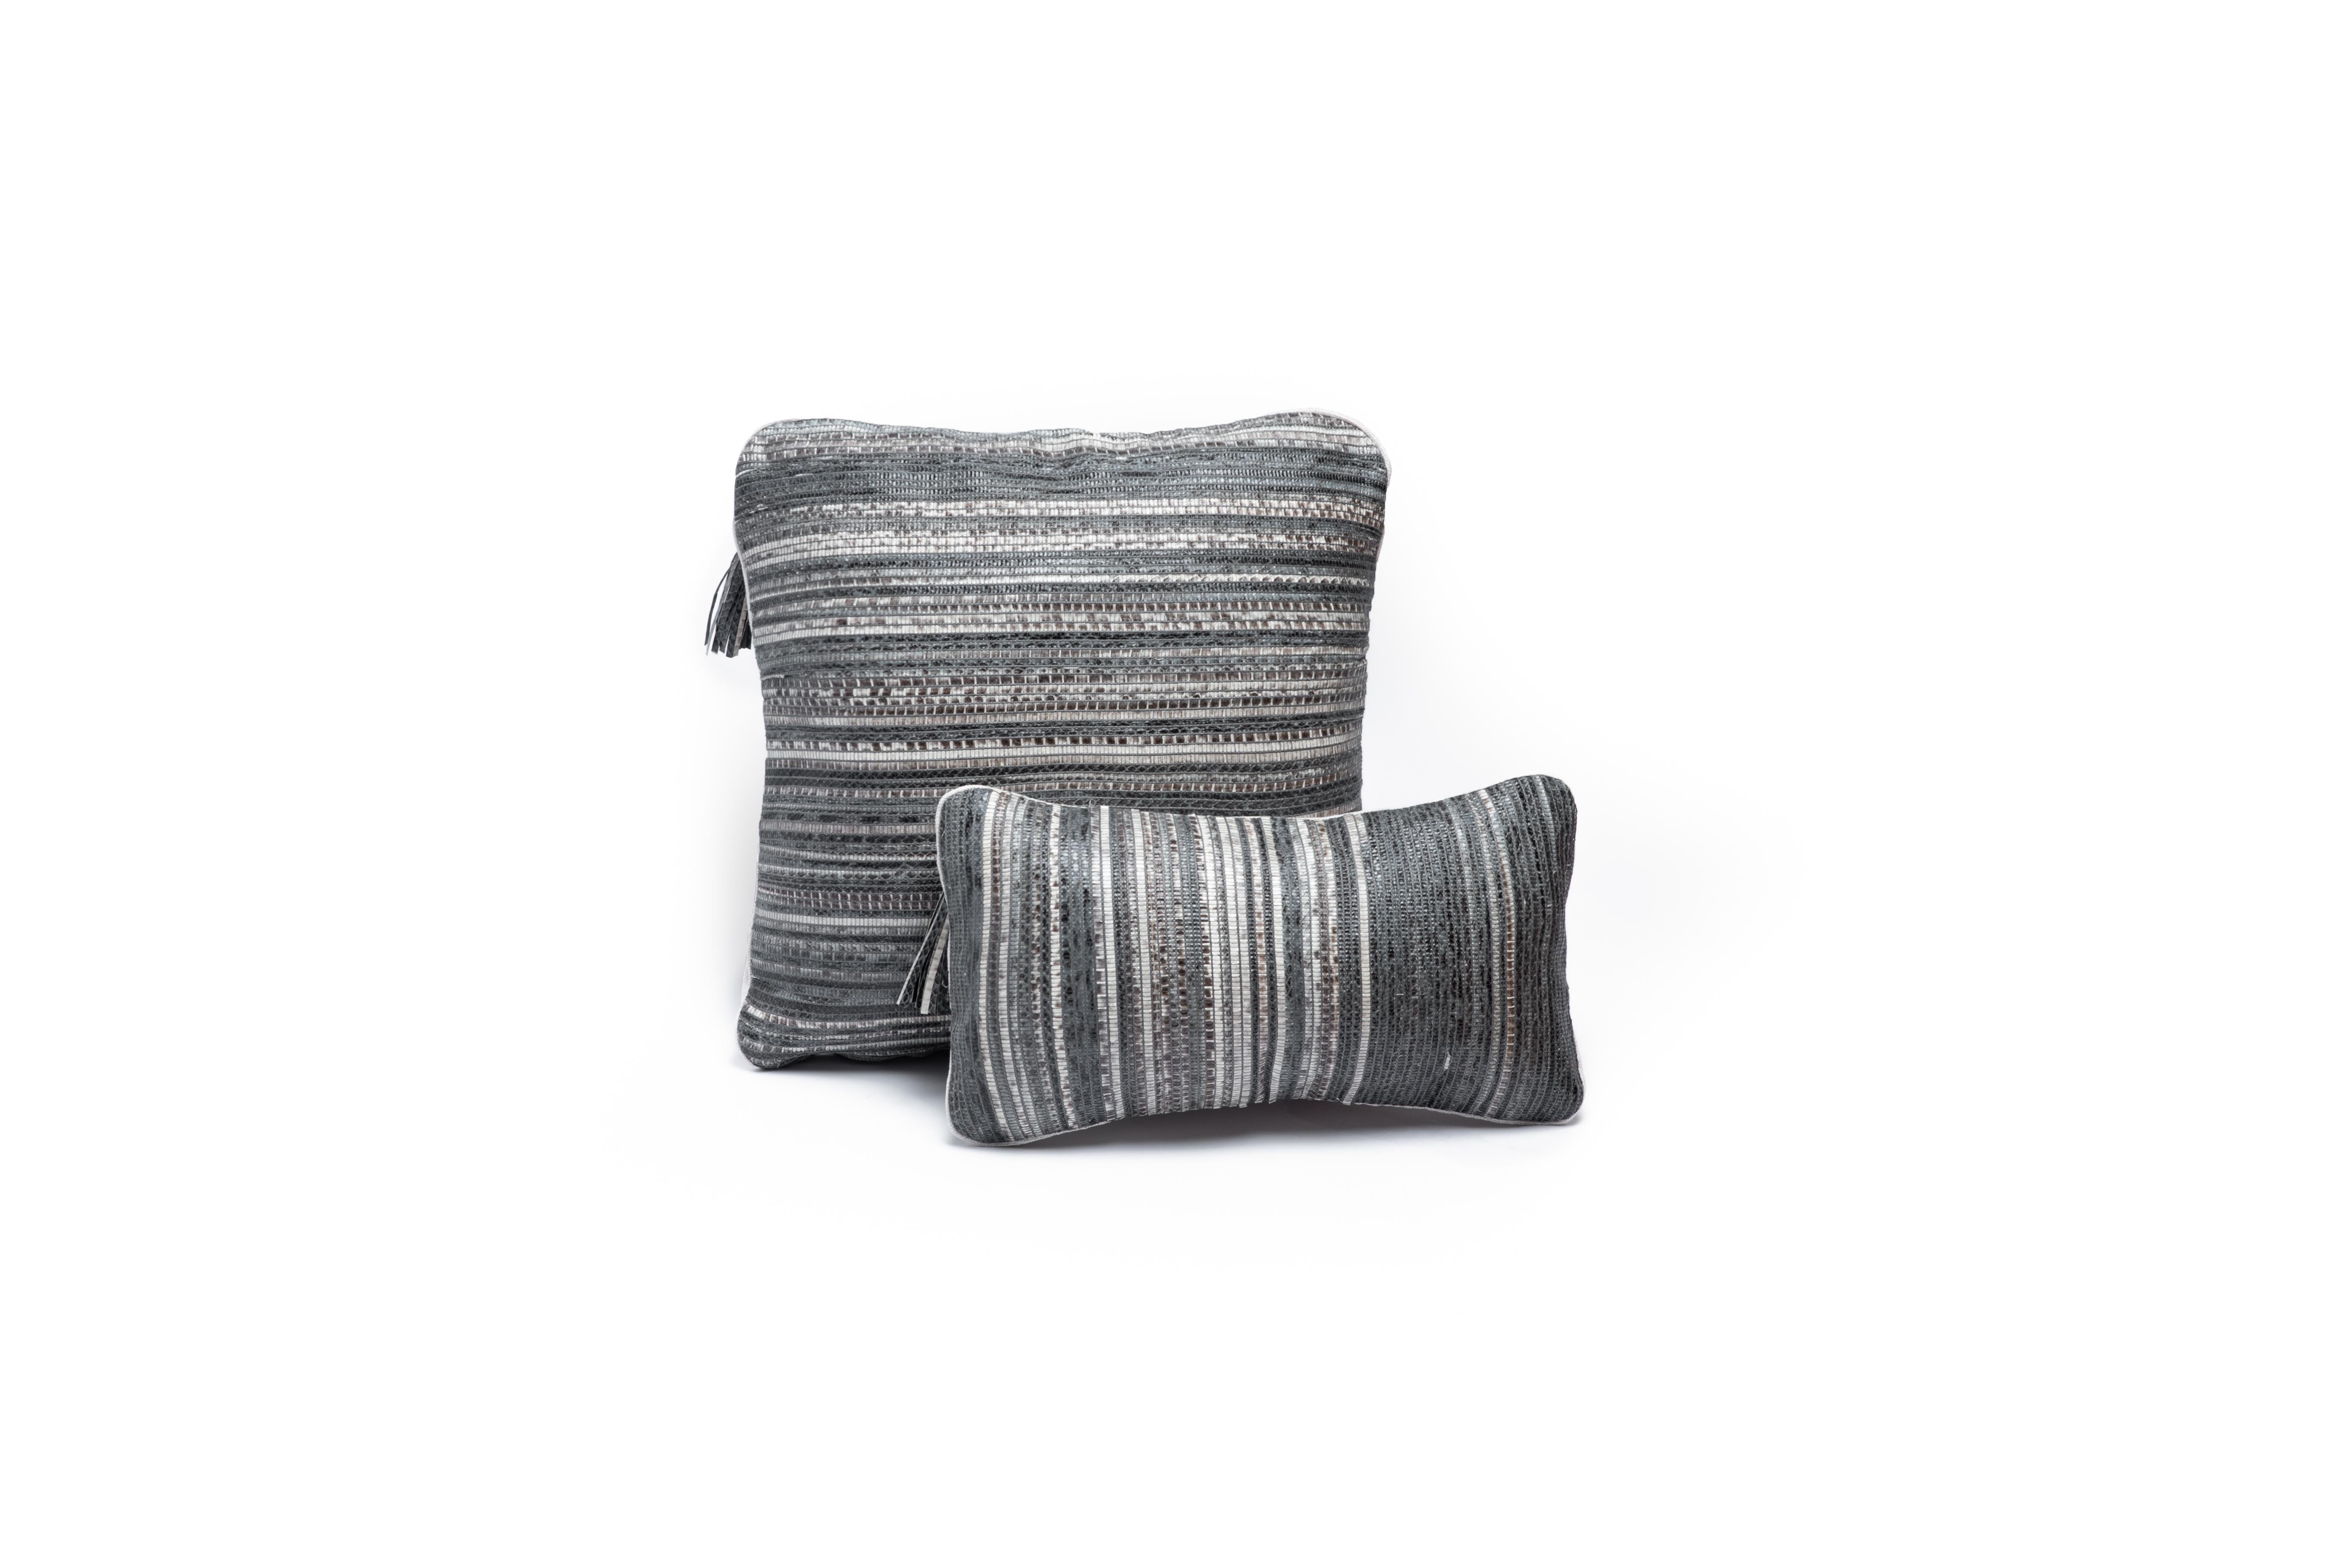 Cushion in Woven Snakeskin by Kifu Paris For Sale 2